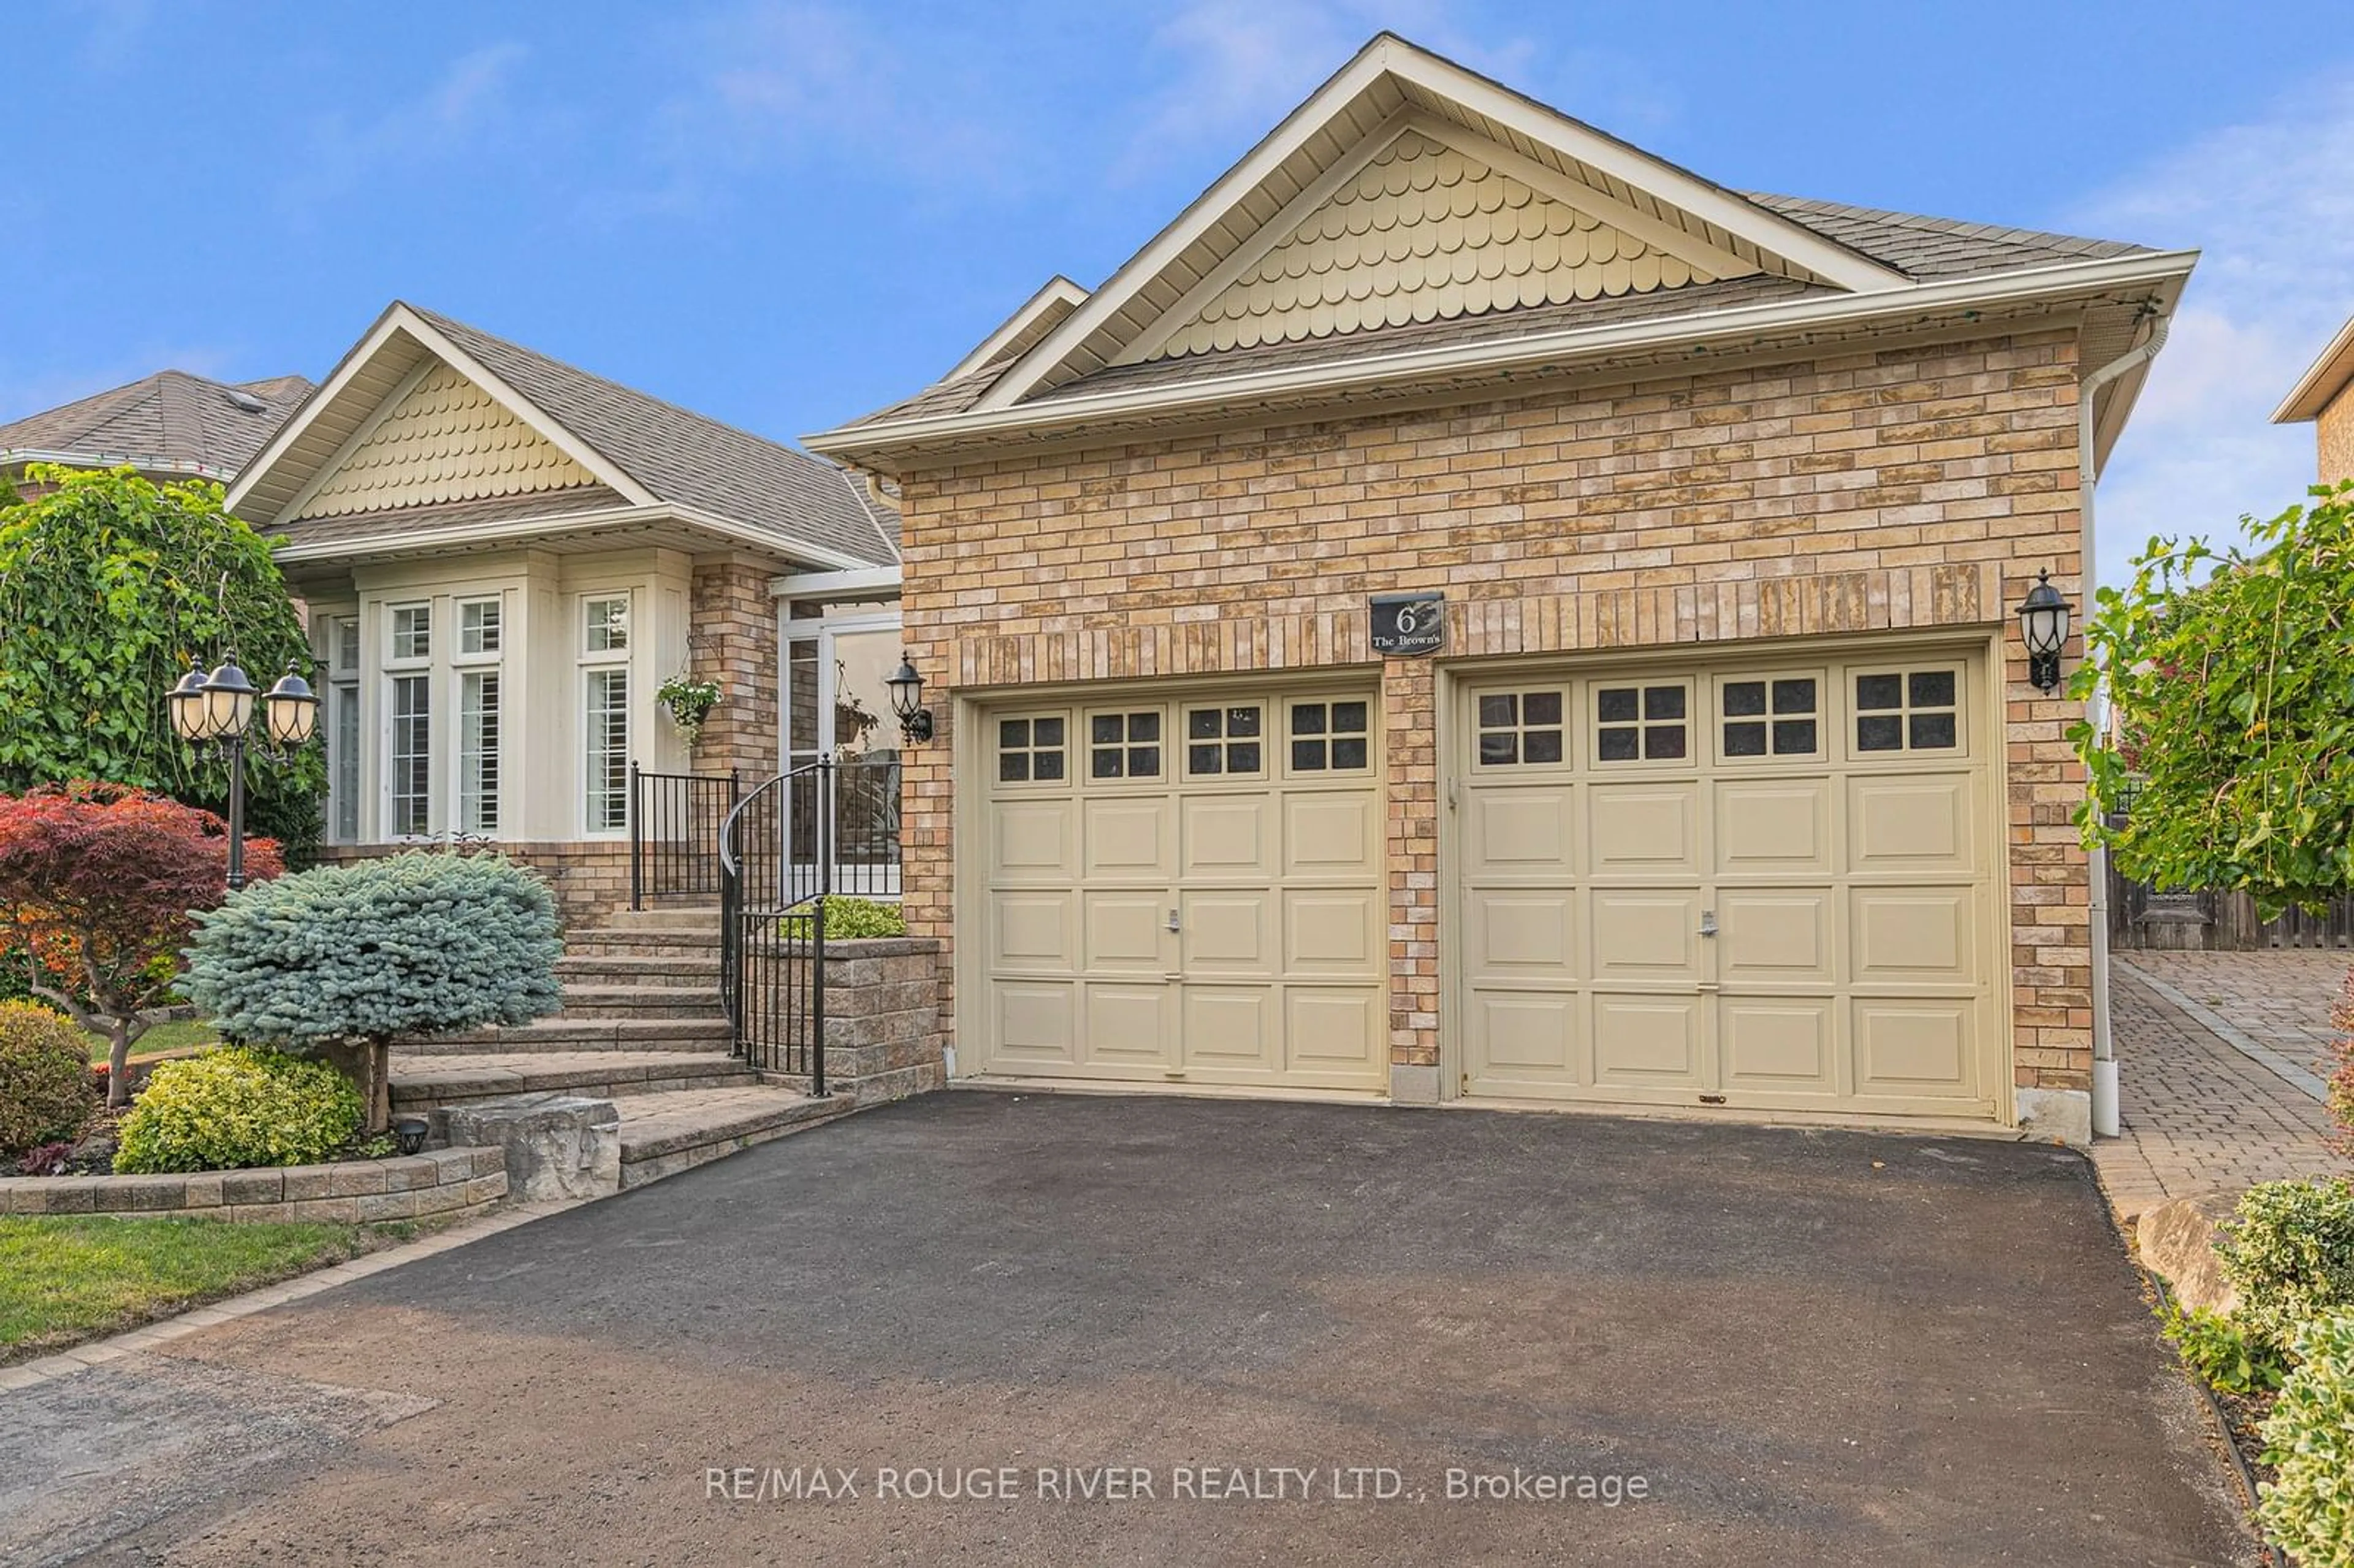 Home with brick exterior material for 6 Branstone Dr, Whitby Ontario L1R 3B6